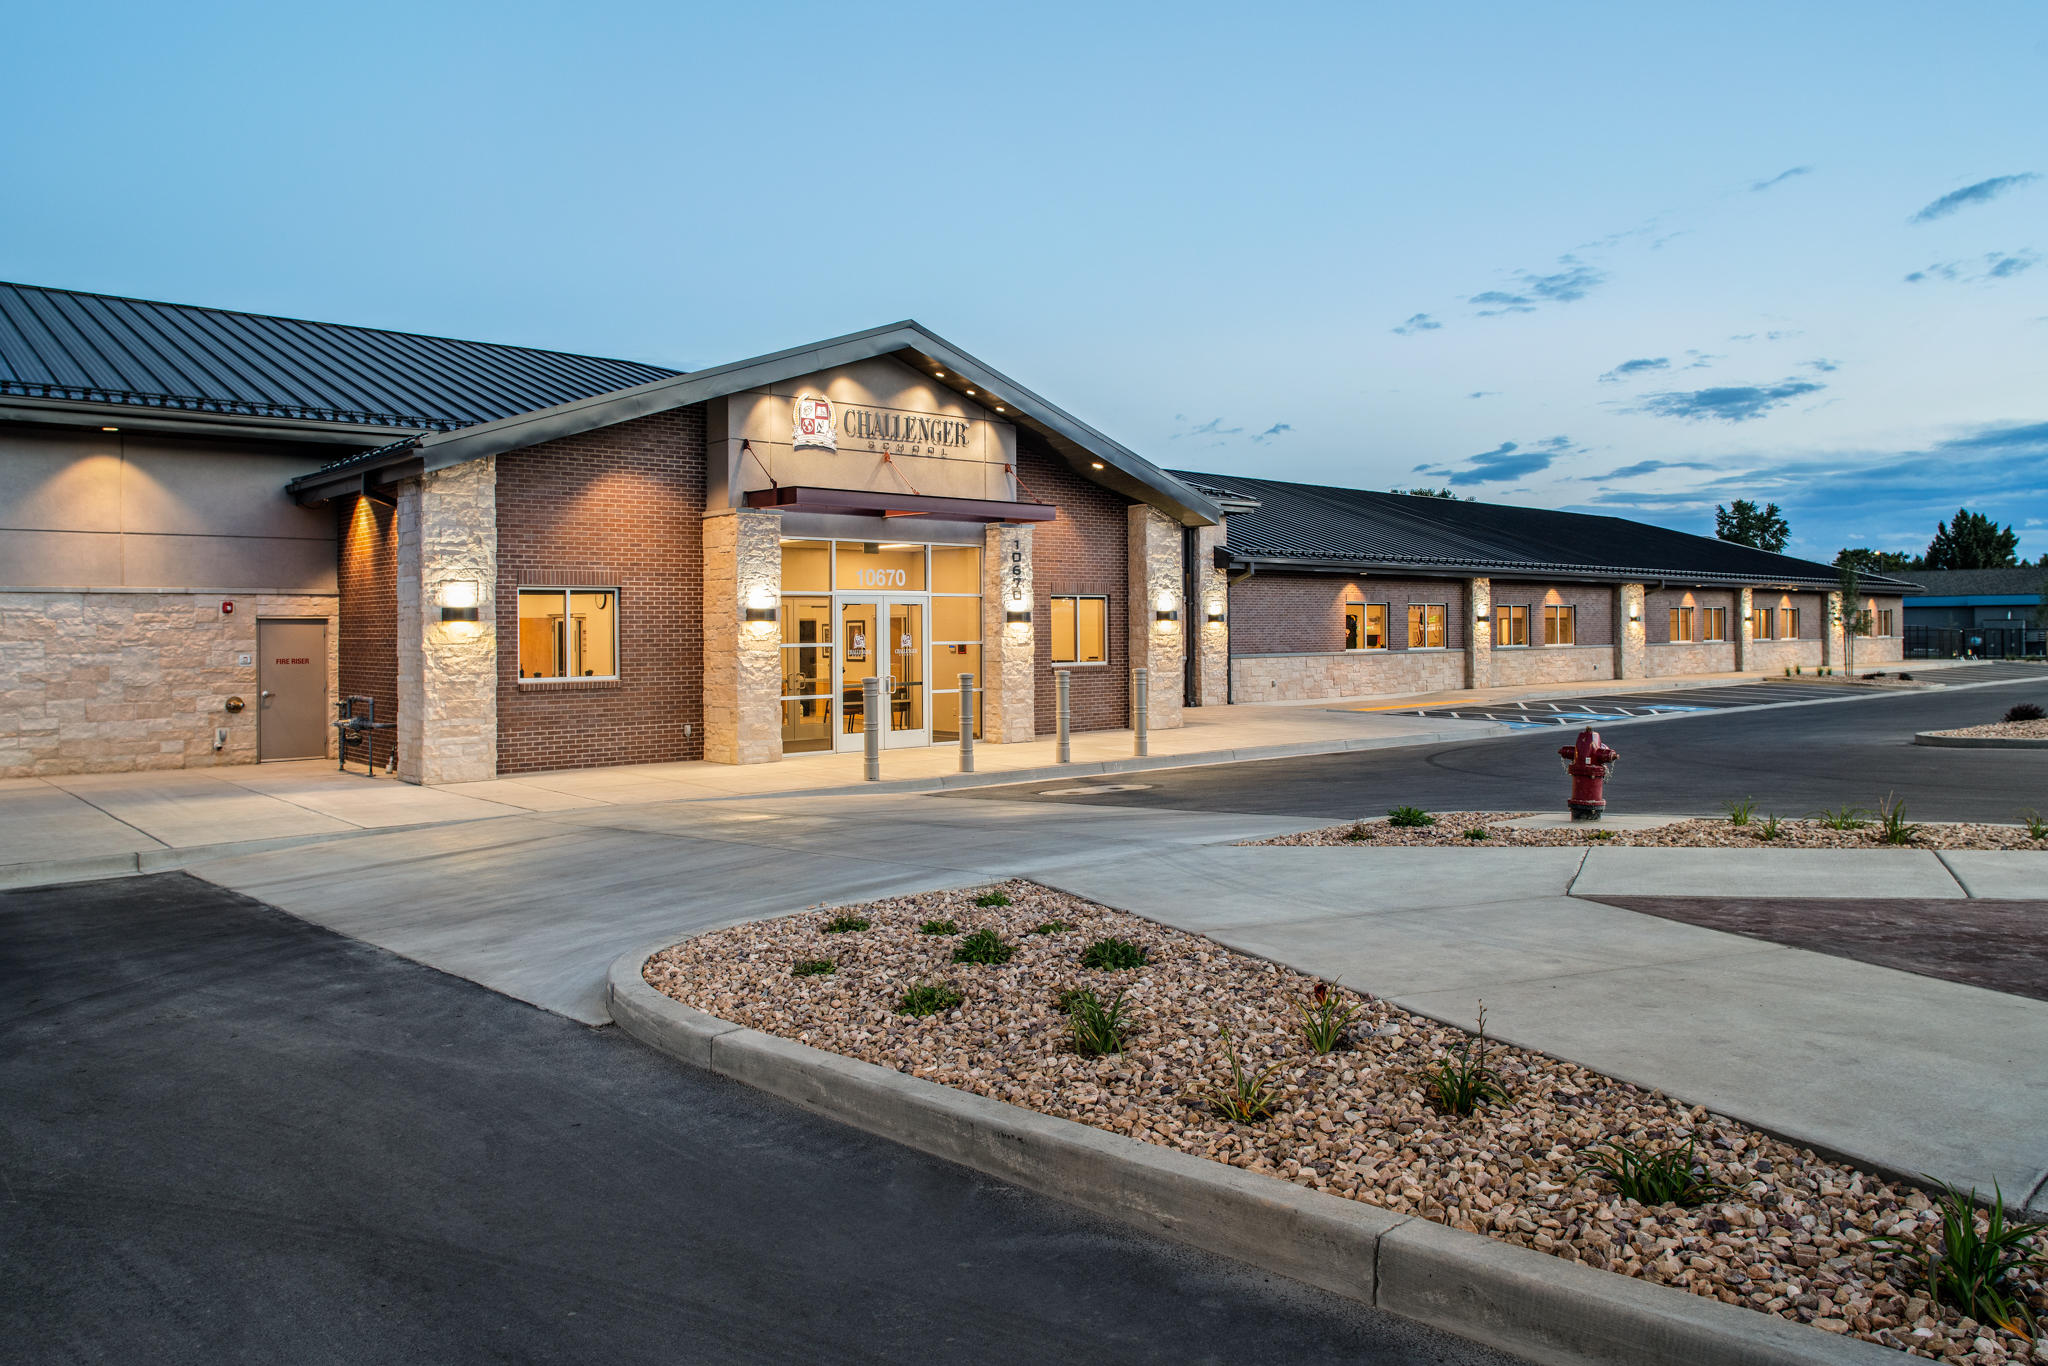 Challenger Sandy boasts a great mid-valley location with an easy-to-access and large, newly-built campus minutes from I-15. Our well-kept and secure private school is comprised of separate wings for preschool, elementary, and middle school. We offer family-centered values and activities, as well as an energetic and engaging staff.

Our new campus opened in fall of 2022 and is located a few blocks away from our previous location.